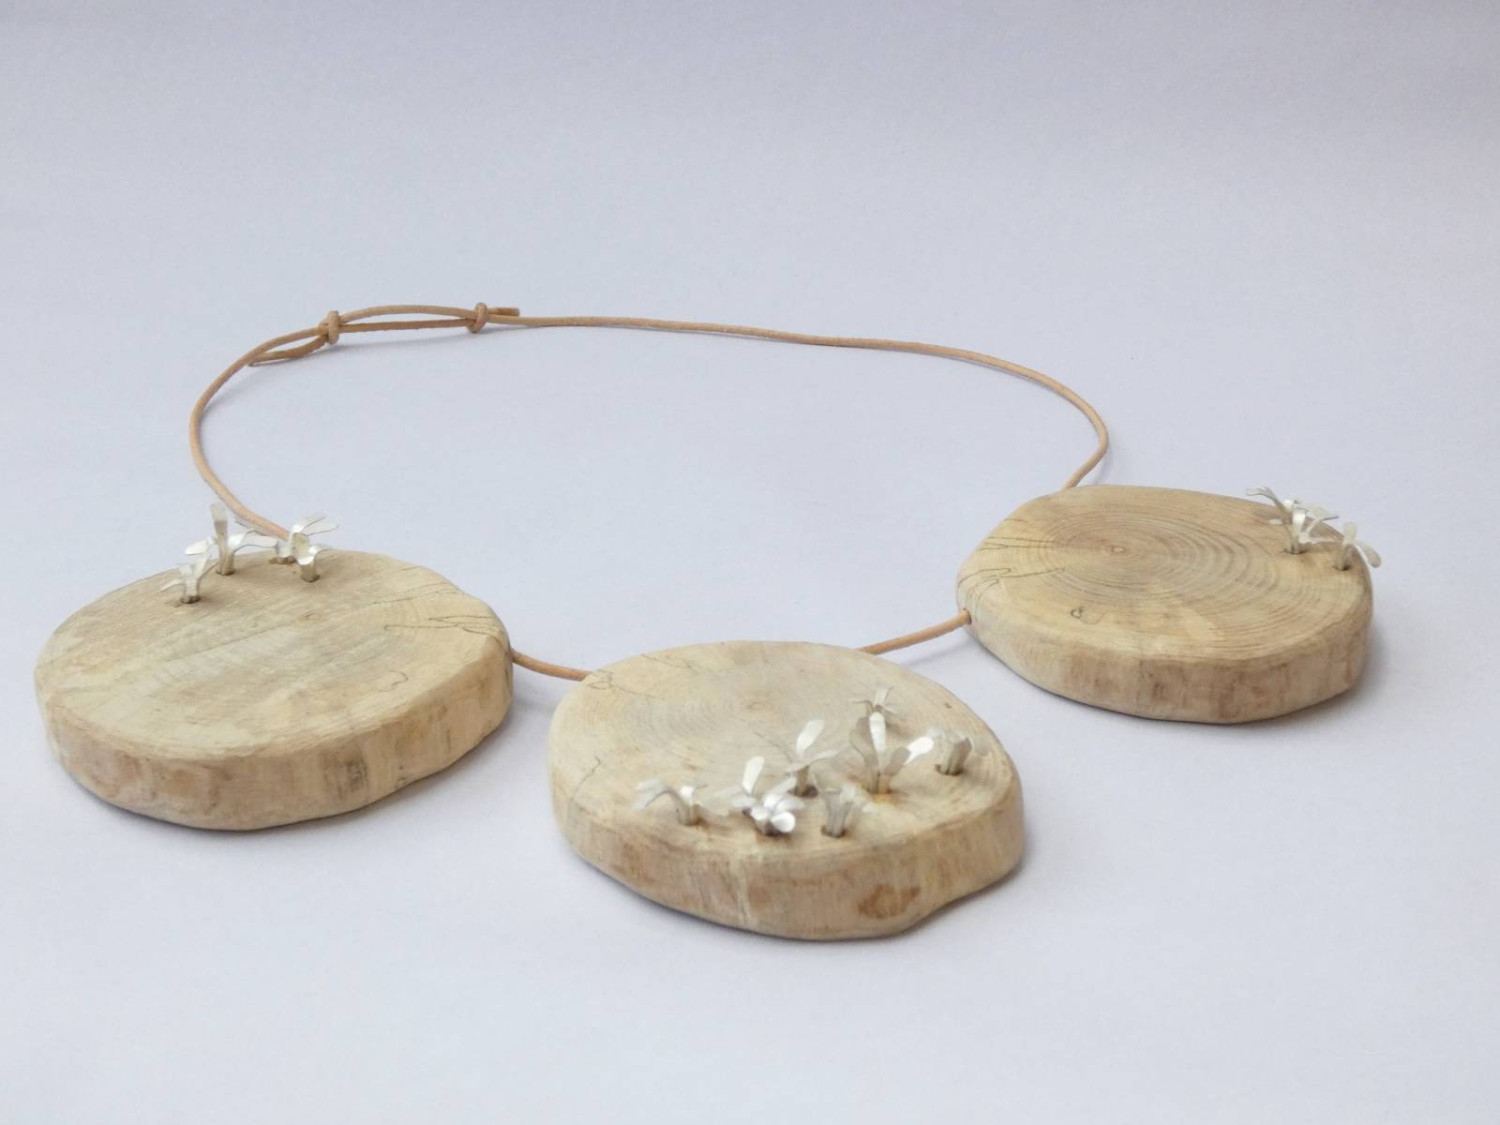 *Life Lines*, neckpiece. Wood (ash), sterling silver, leather cord